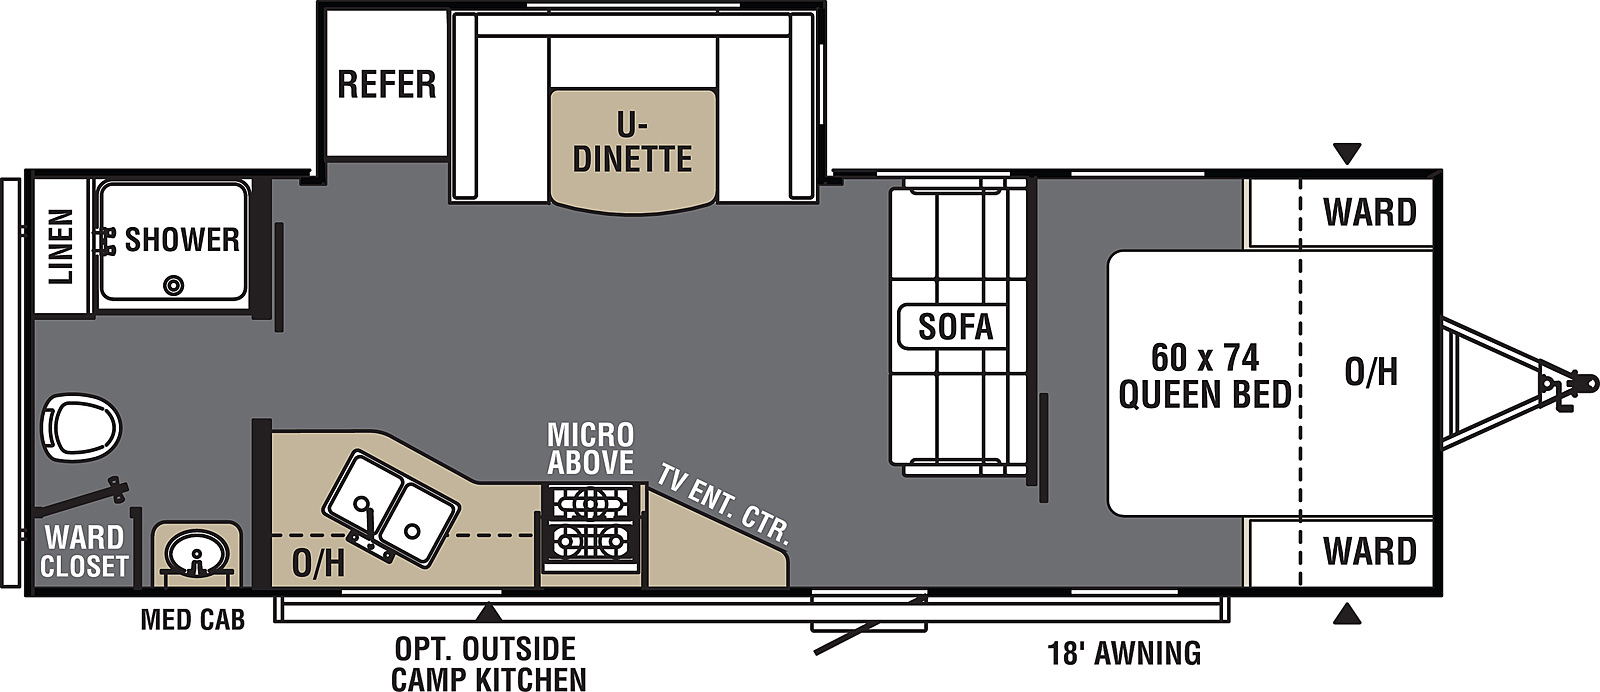 Viking Ultra-Lite 24RBS floorplan. The 24RBS has one slide out and one entry door.